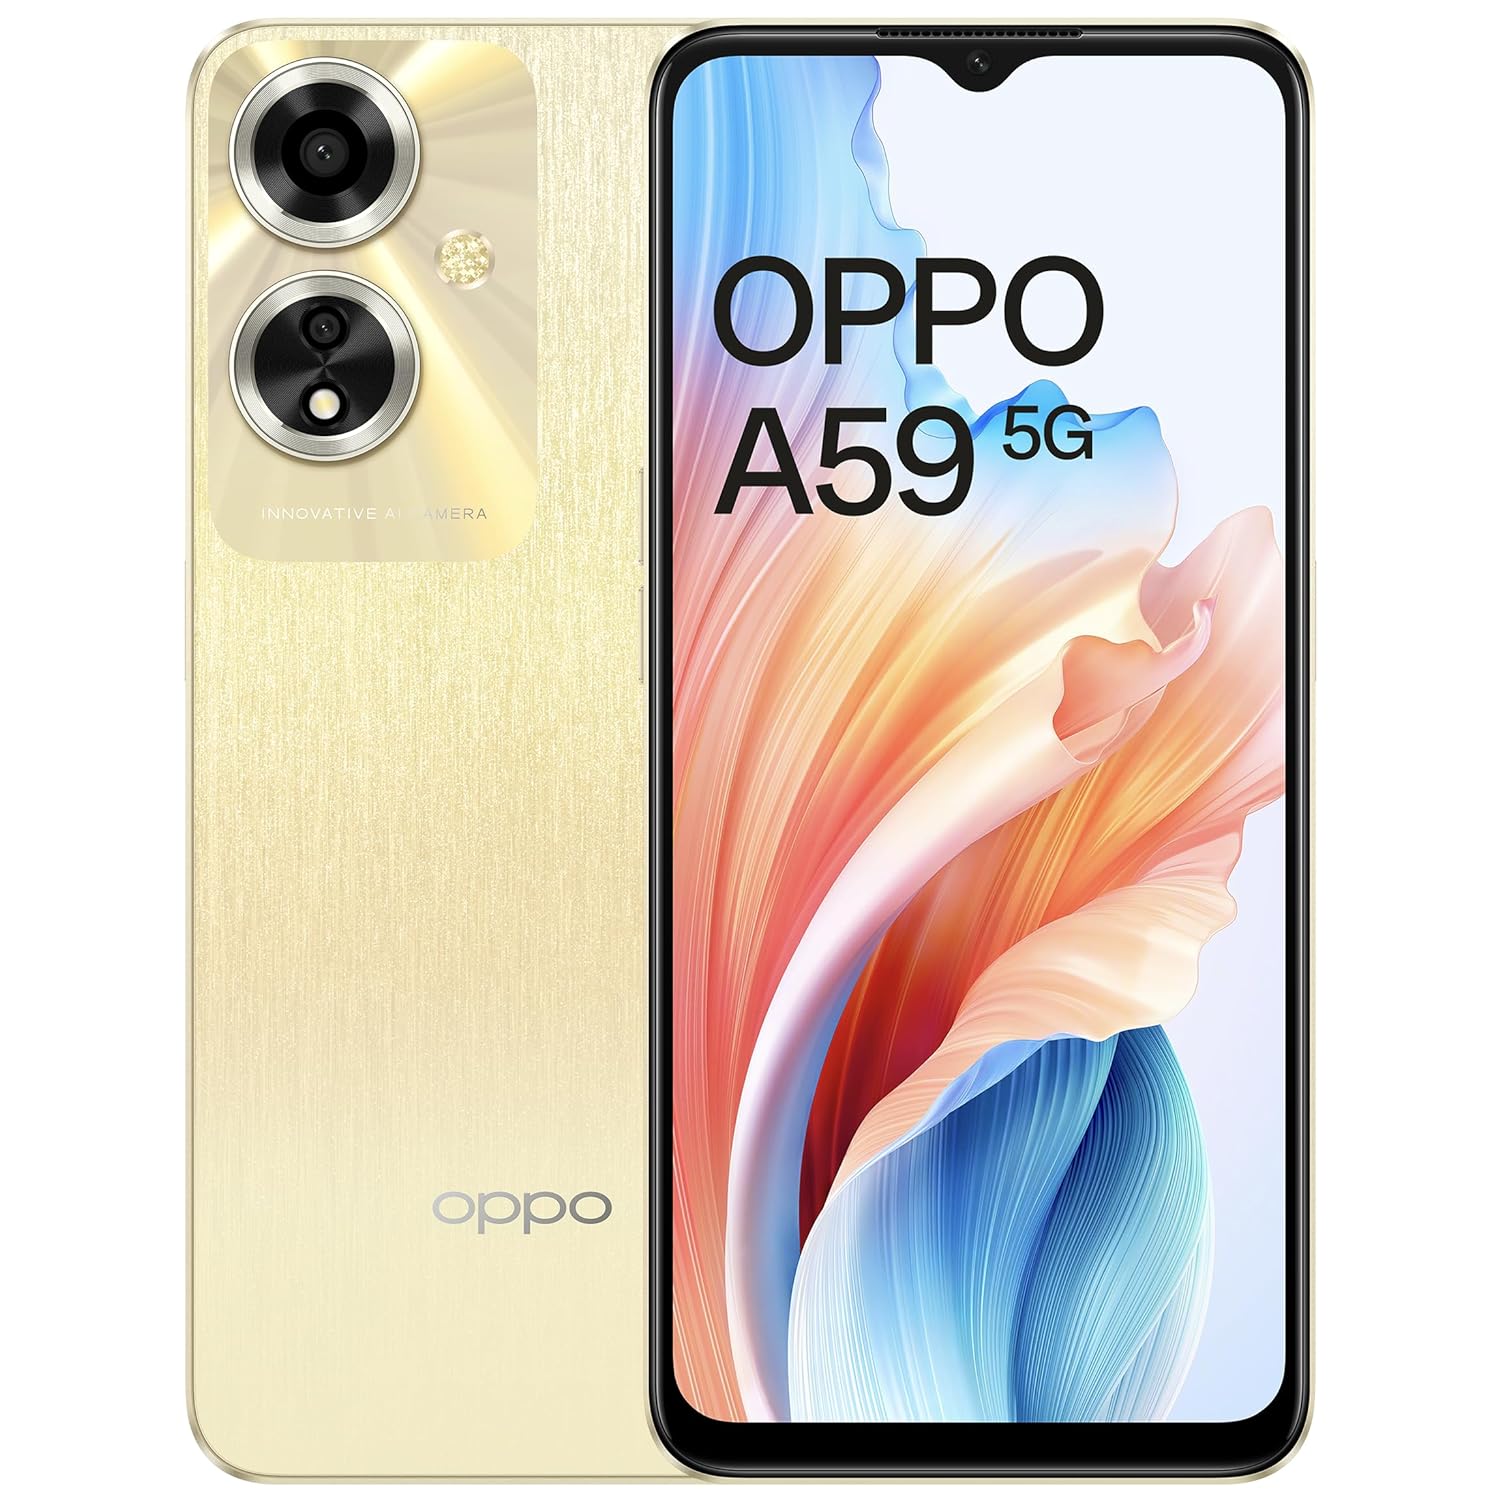 OPPO A59 5G (Silk Gold, 4GB RAM, 128GB Storage) | 5000 mAh Battery with 33W SUPERVOOC Charger | 6.56" HD+ 90Hz Display | with No Cost EMI/Additional Exchange Offers